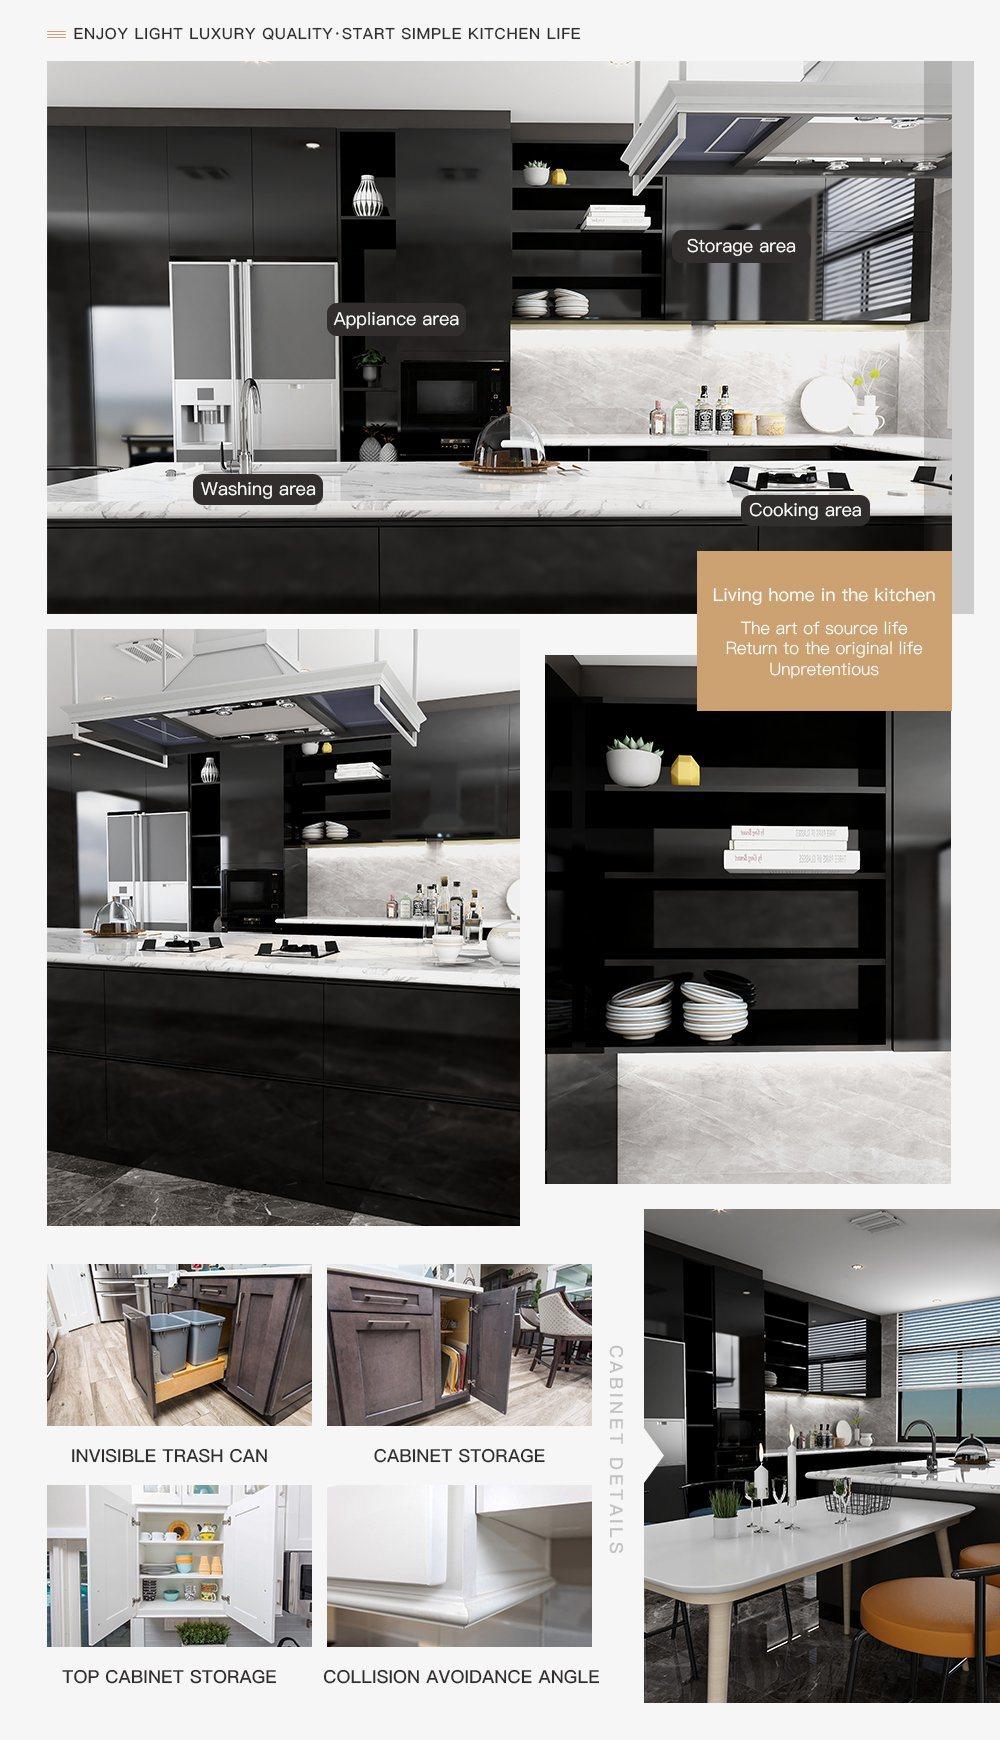 New Style Luxury UV Lacquer Doors MDF Kitchen Cabinets Design